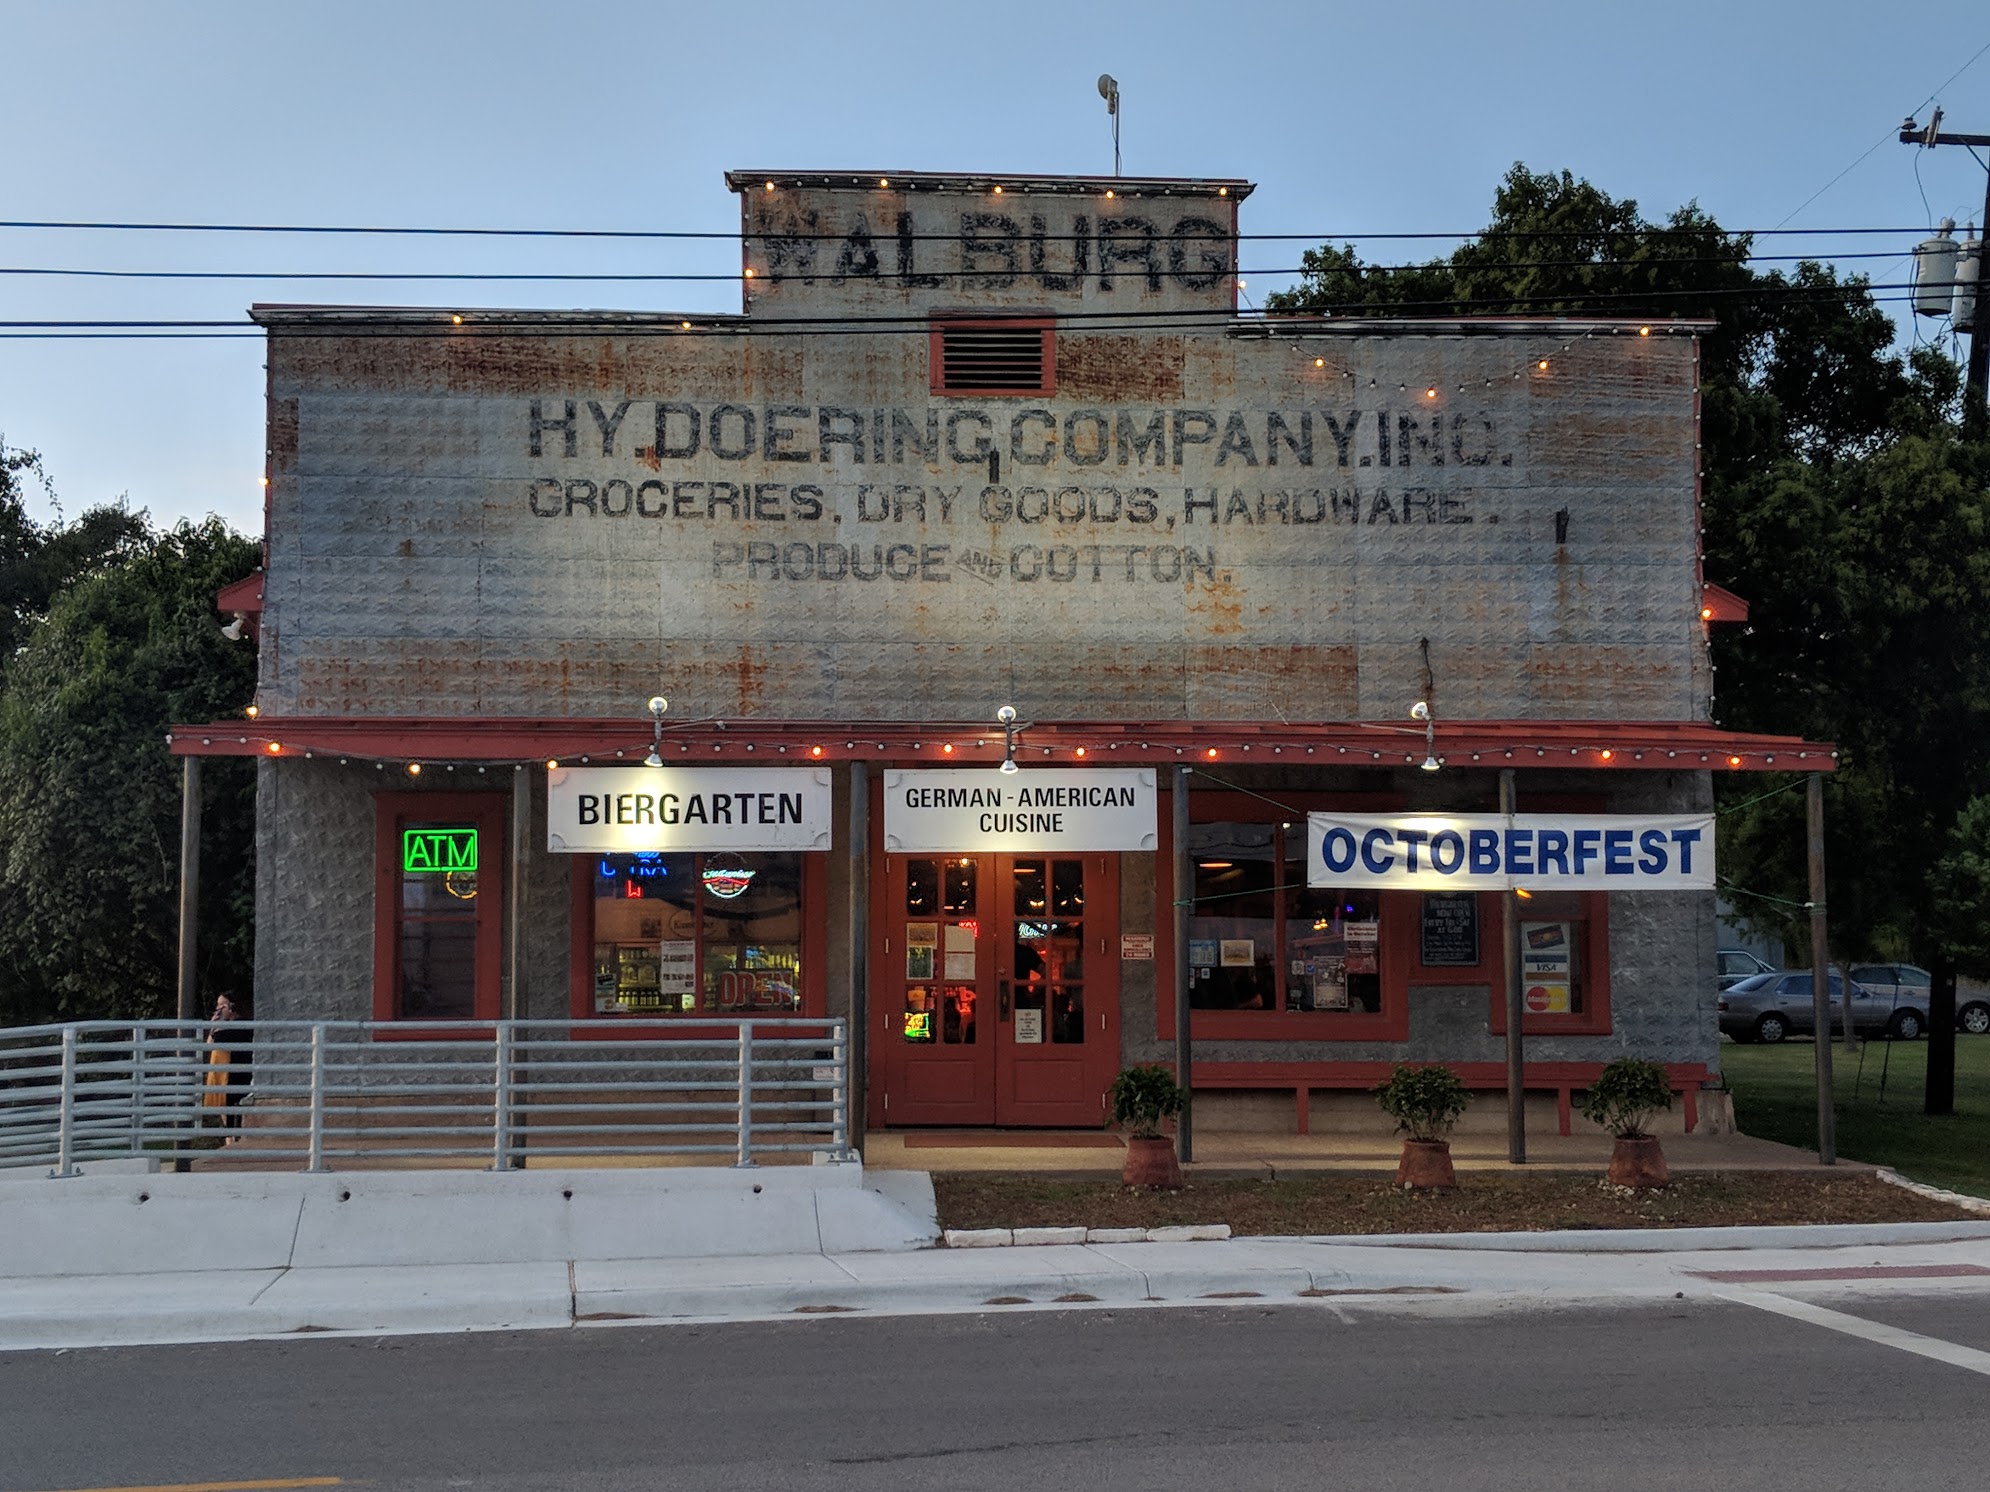 Photo of the Walburg Restaurant and Biergarten in Walburg, Texas, a short drive from the Heywood Hotel in Austin, Texas.